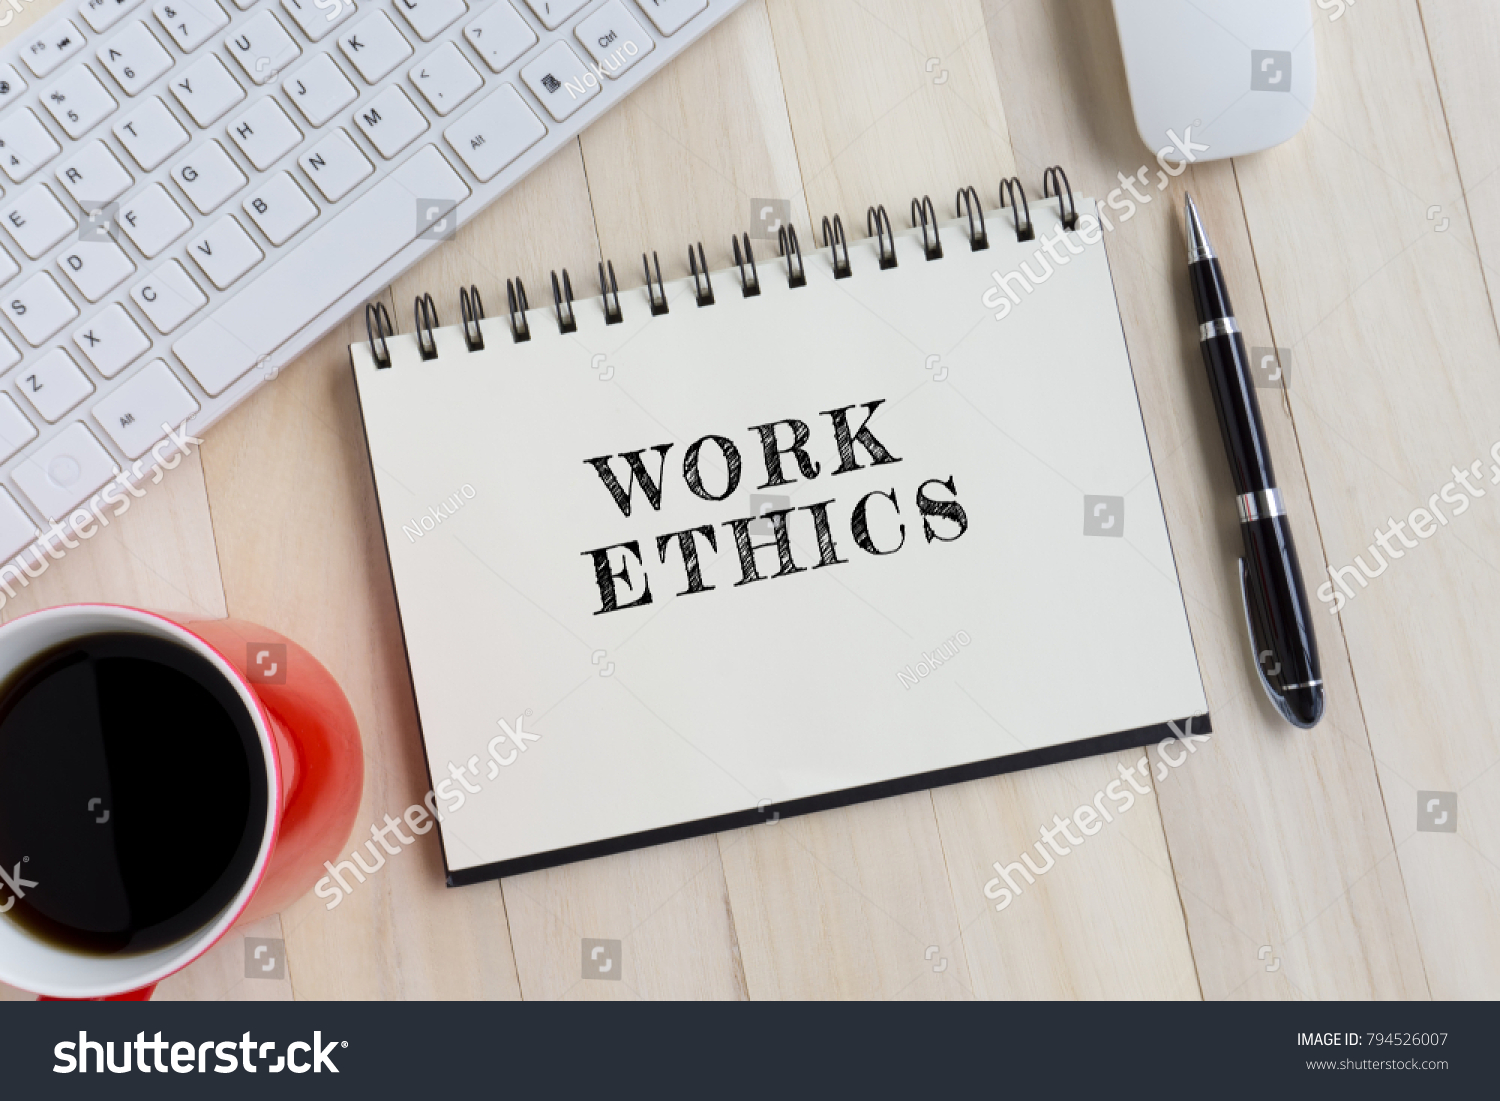 Top view of office desk and notepad with word - Work Ethics. Business concept. #794526007